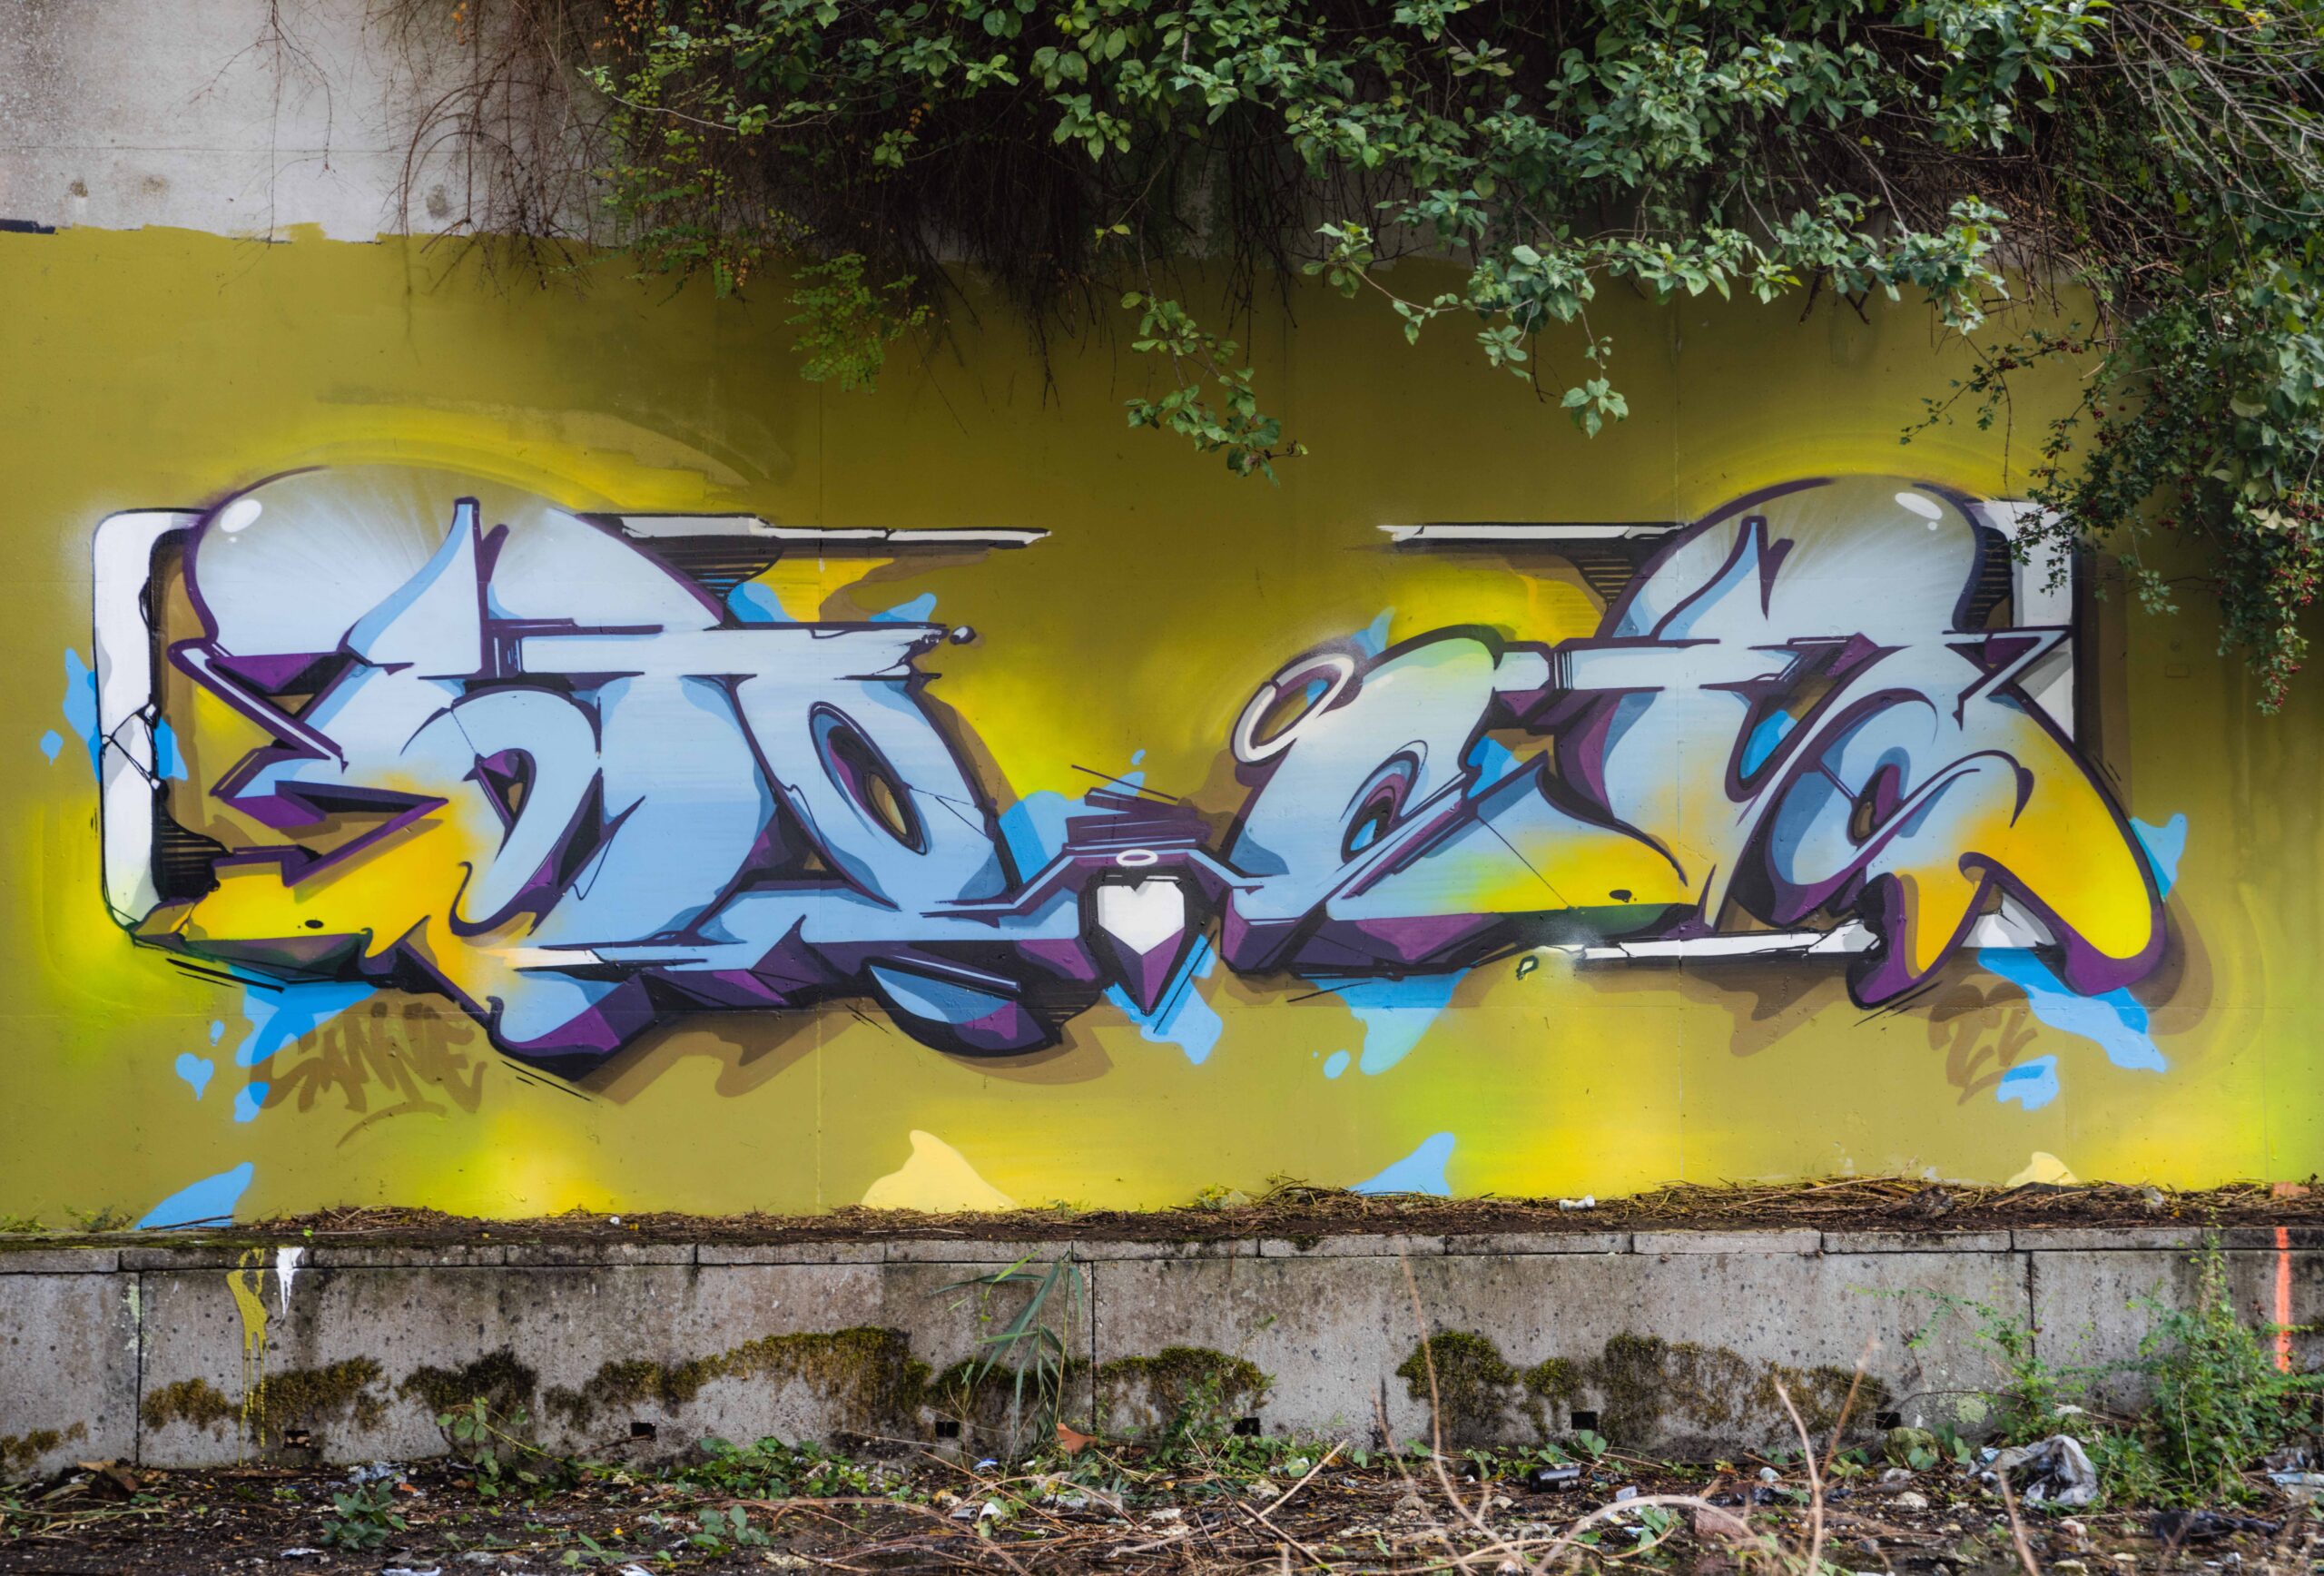 A work by Does - Lr final charleroi